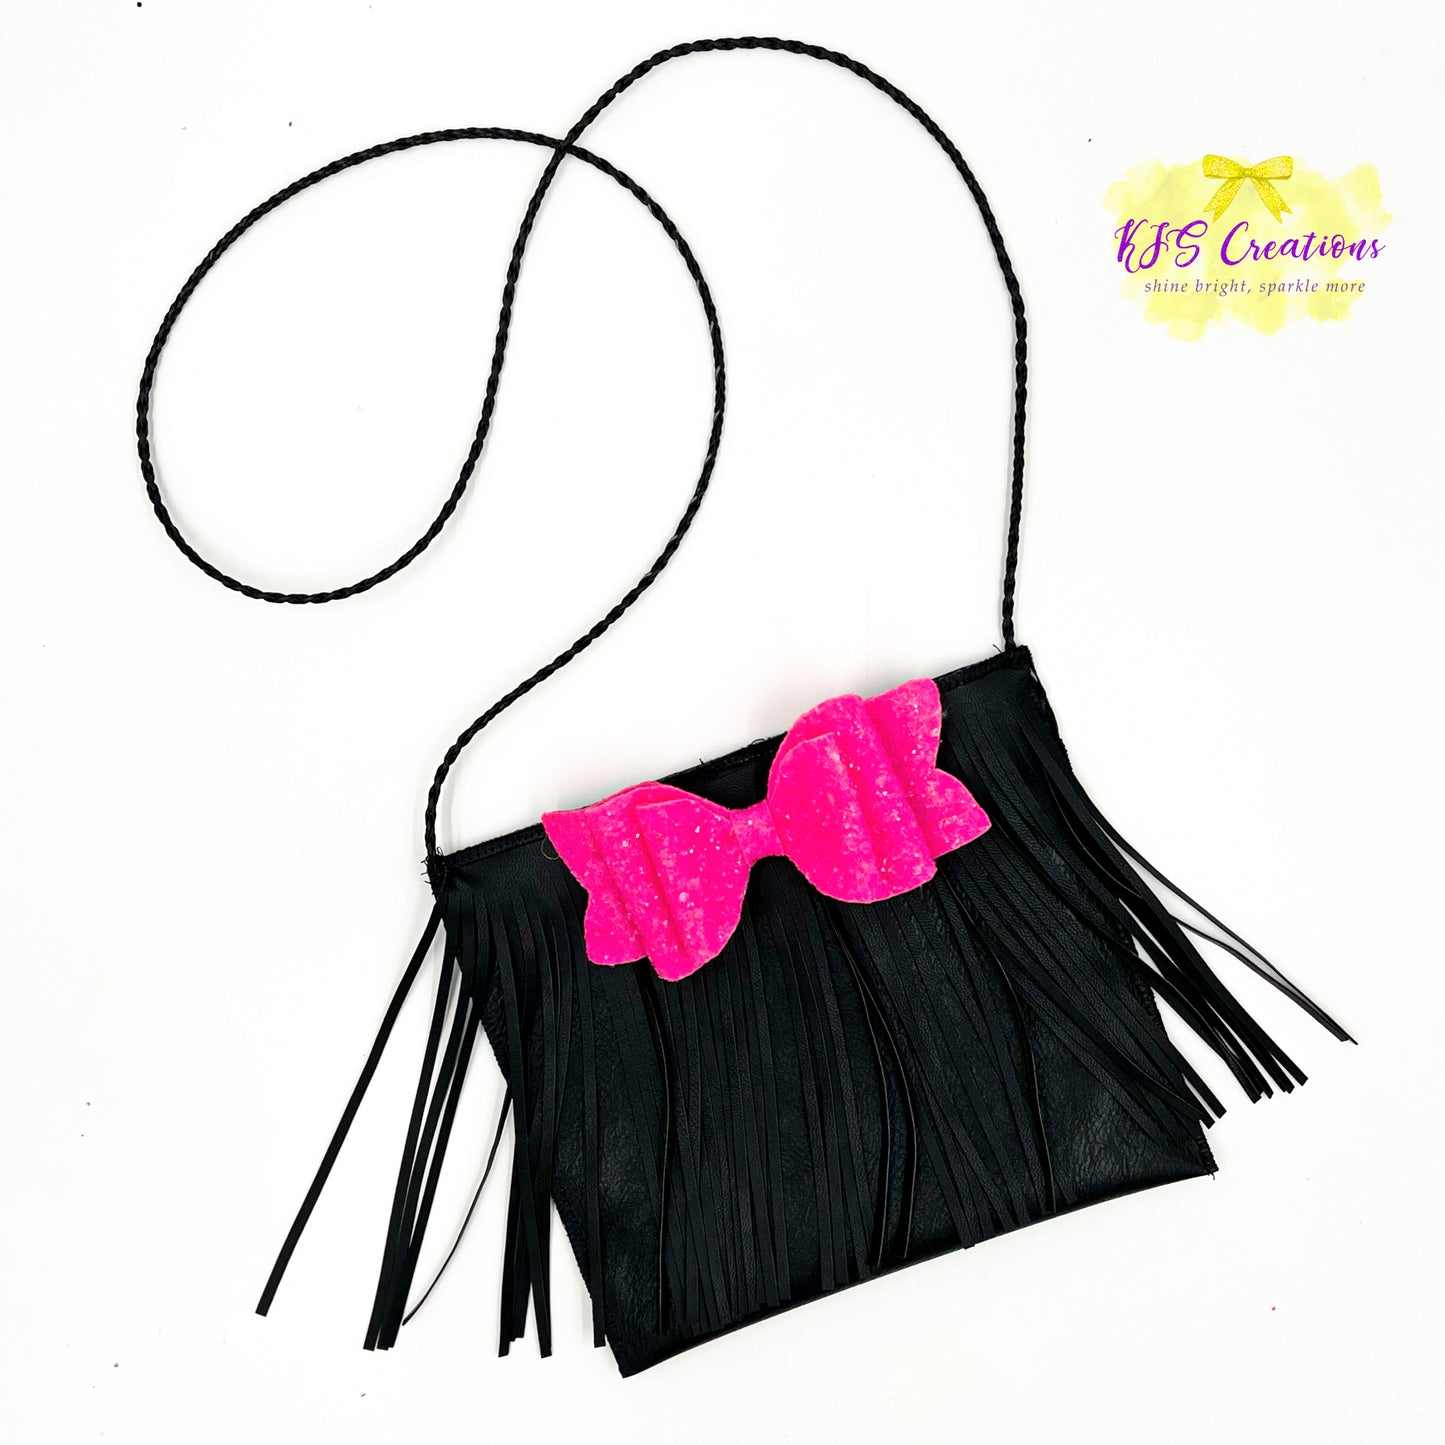 Leather fringe hand bags